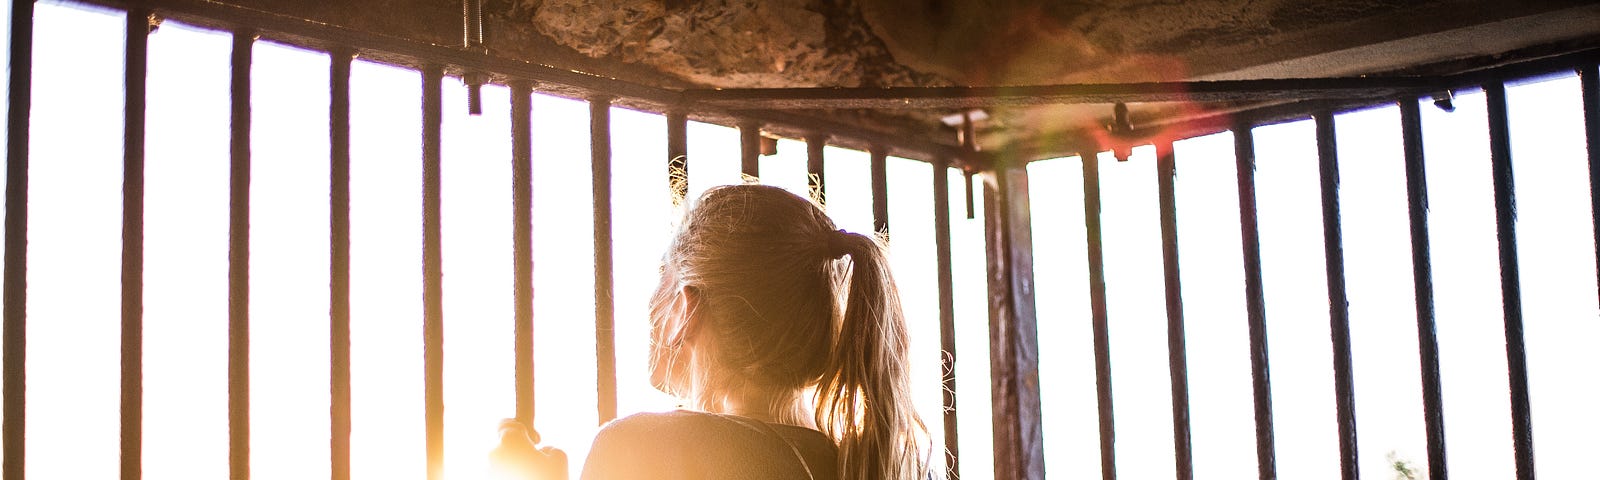 Woman looking out from behind bars, sun shining in on her.